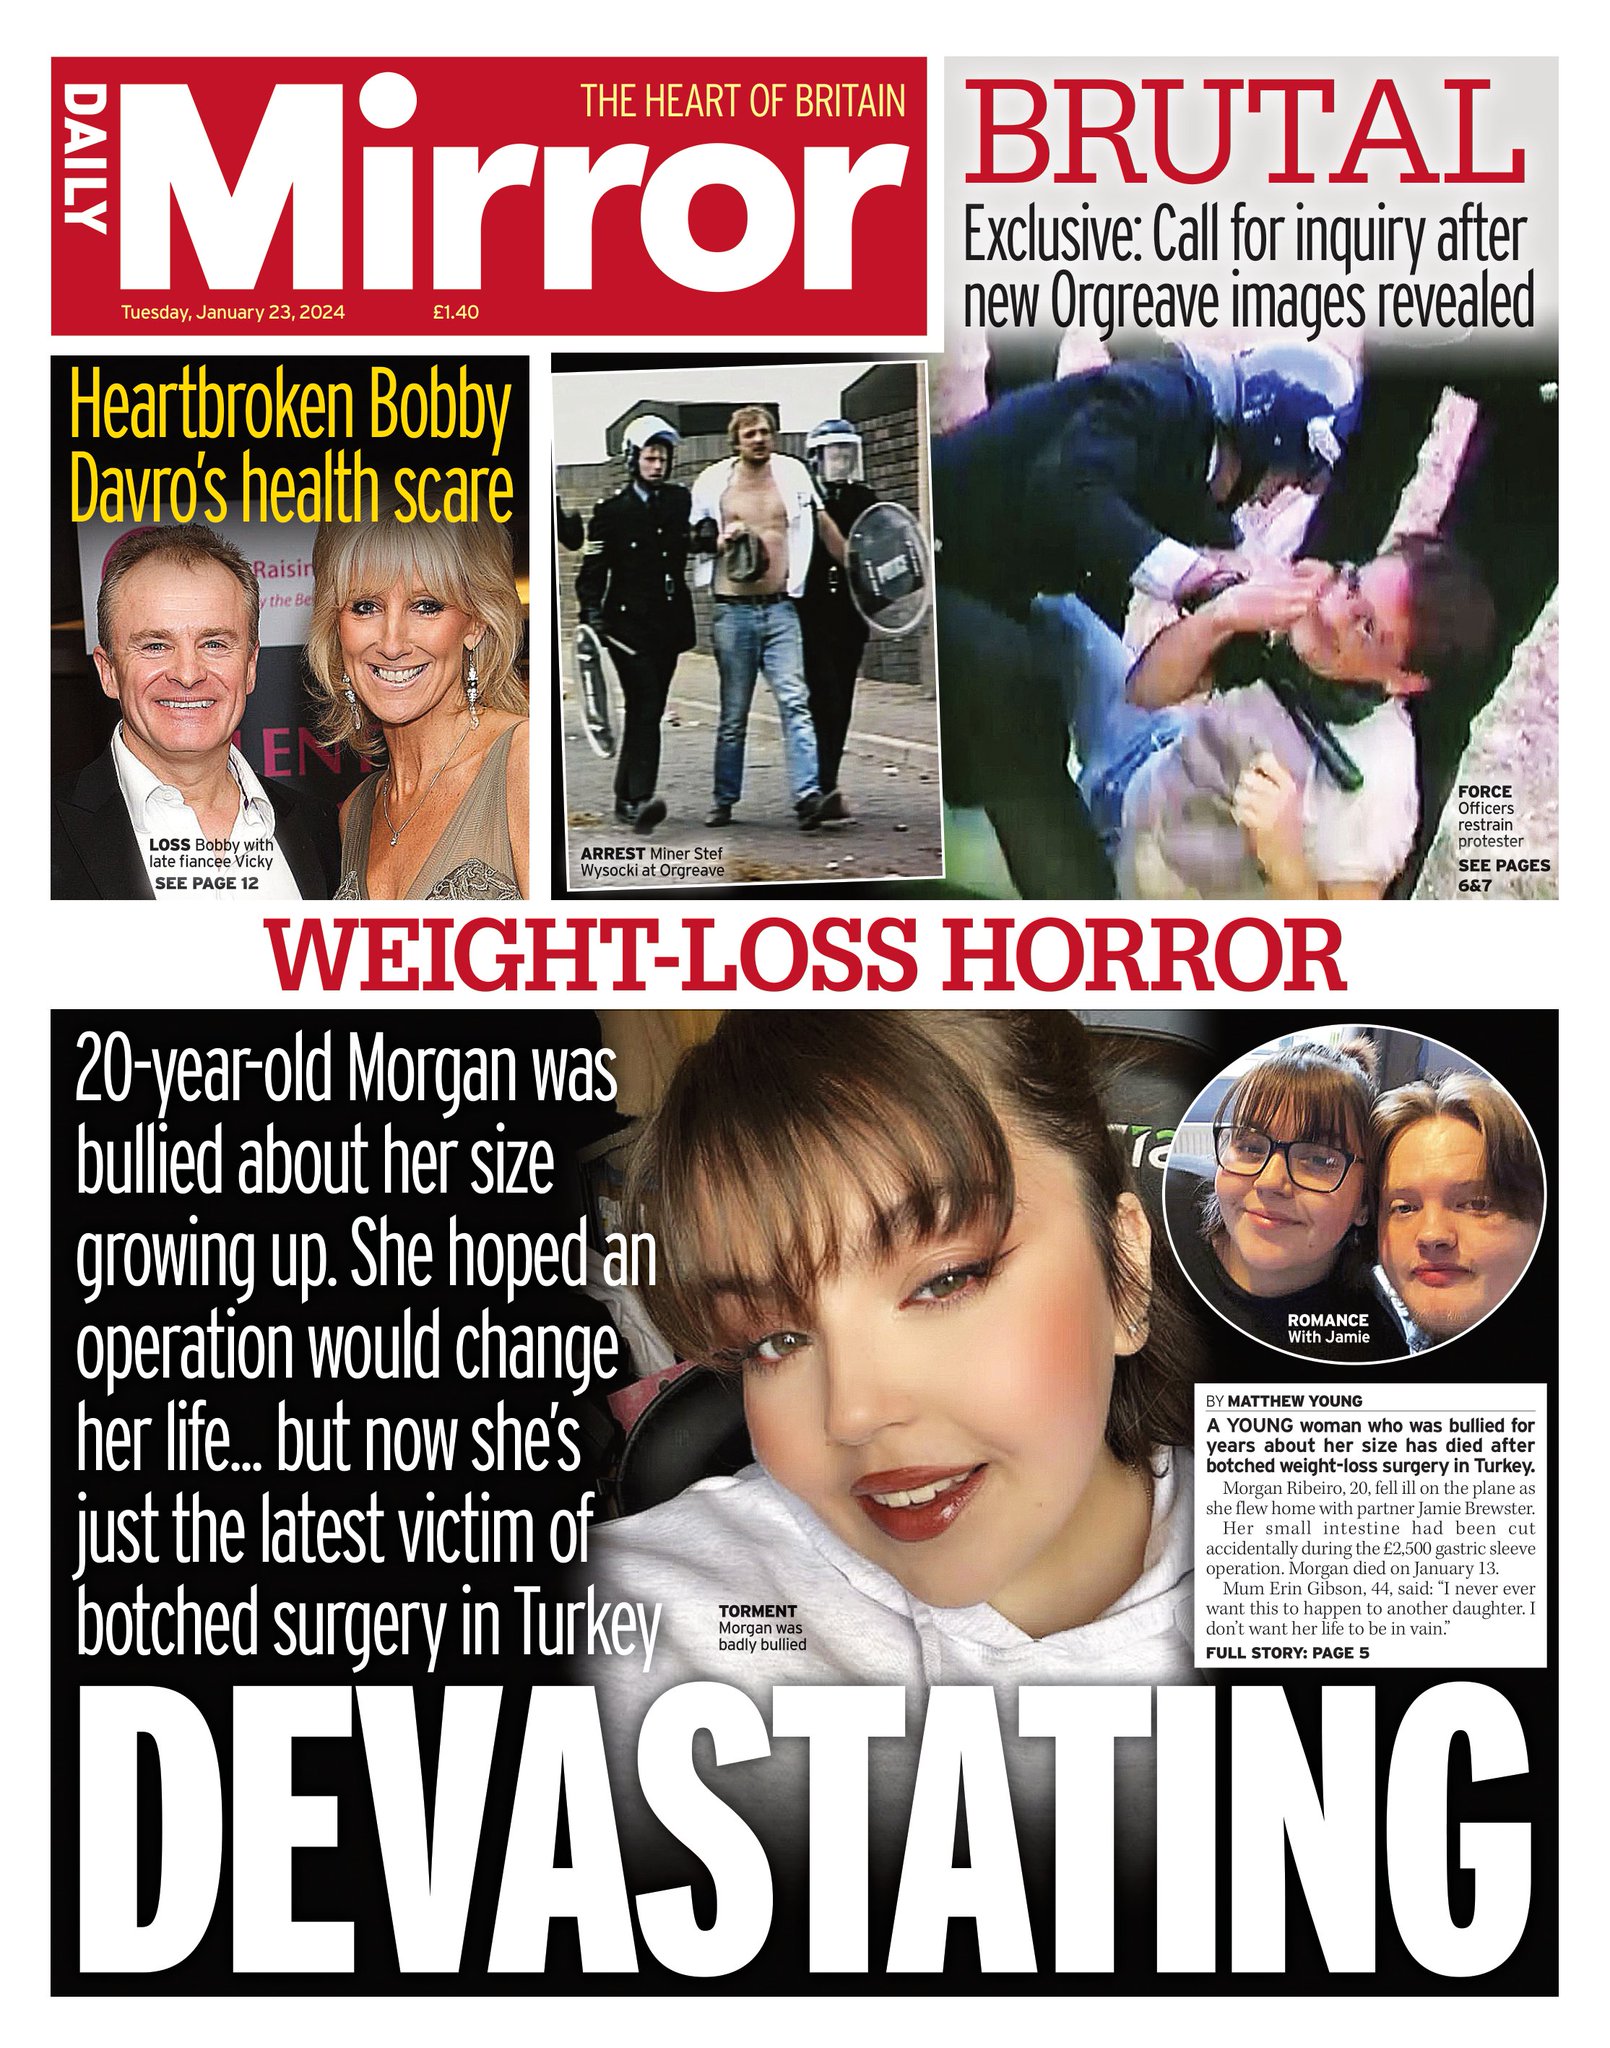 Daily Mirror 9 